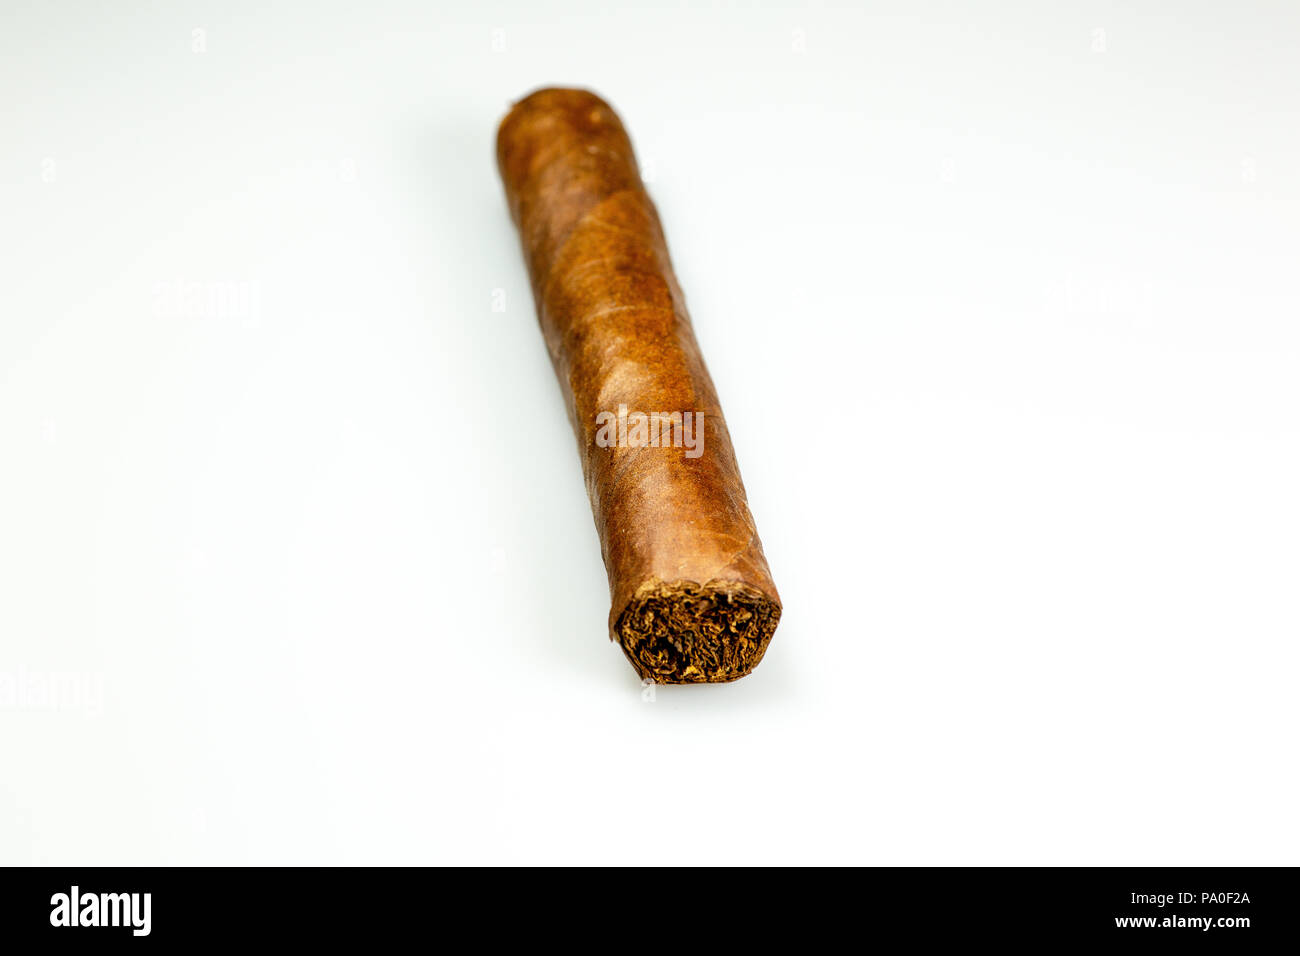 A brown cuban cigar freshly rolled on a table Stock Photo